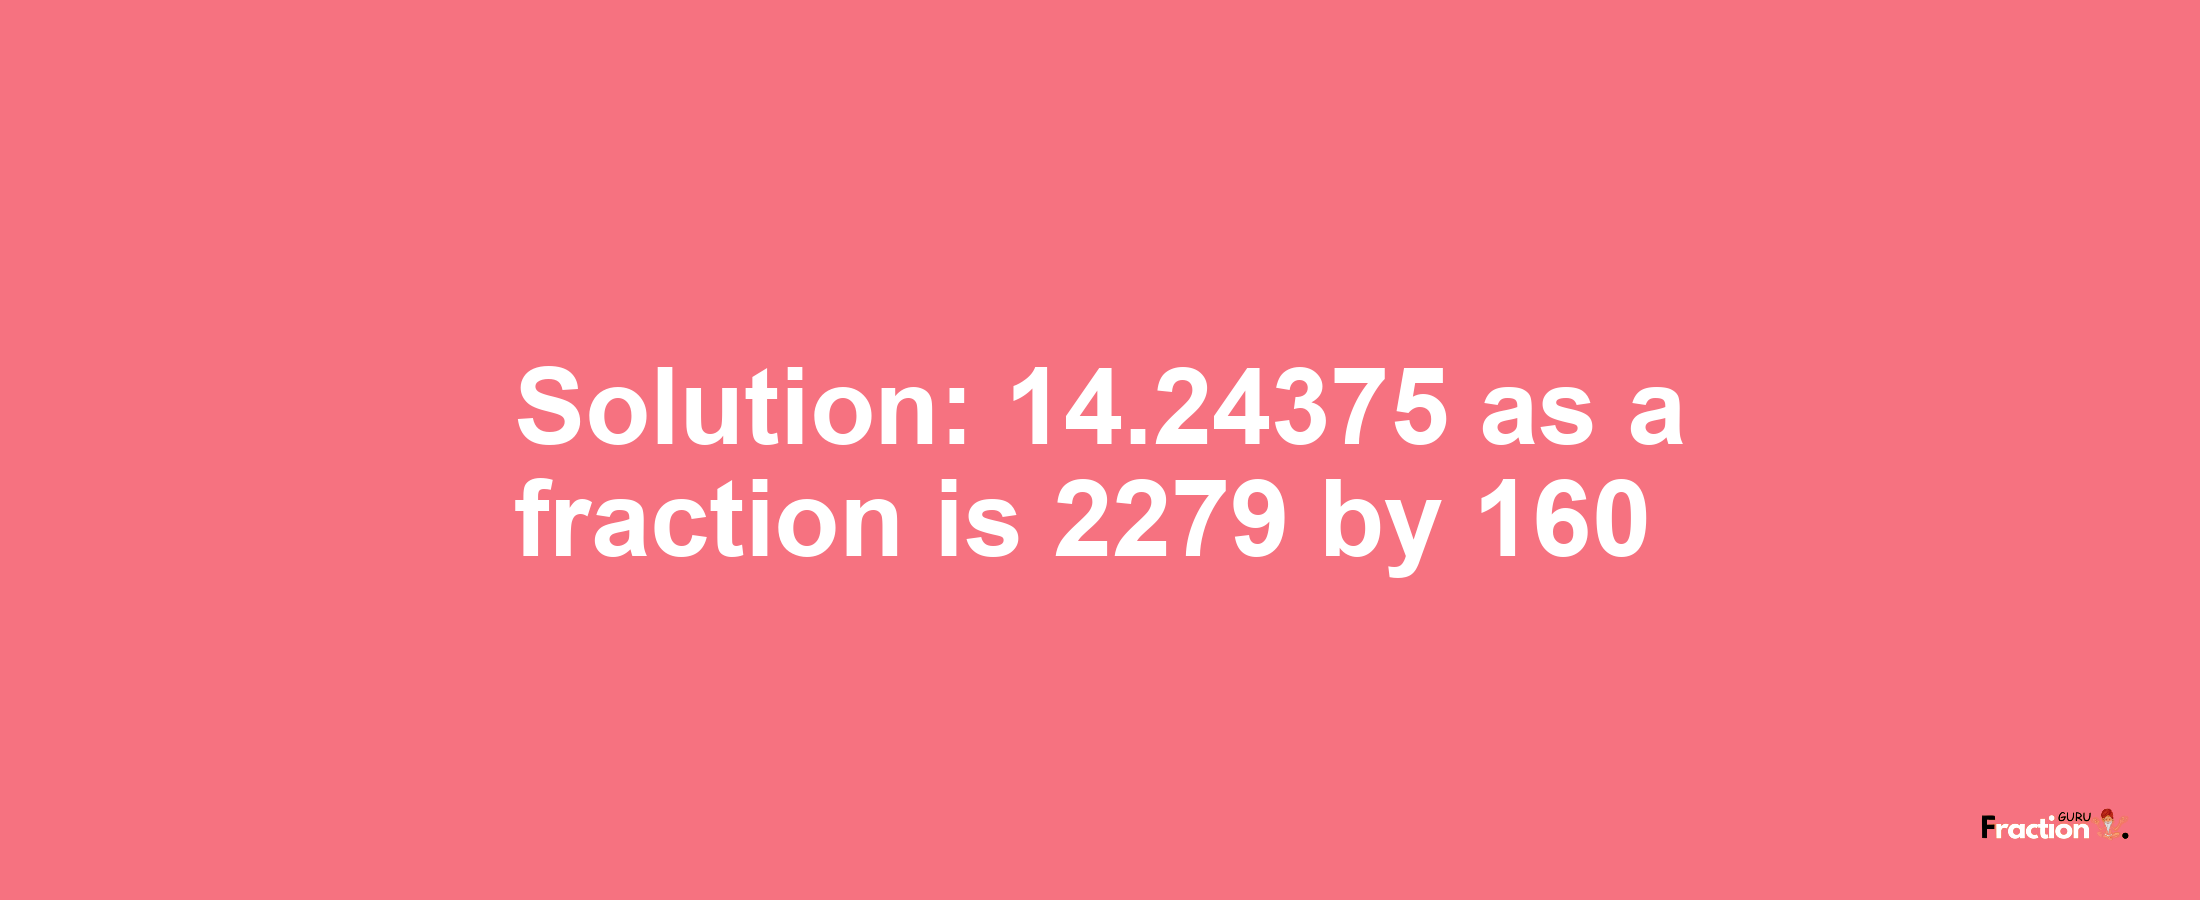 Solution:14.24375 as a fraction is 2279/160